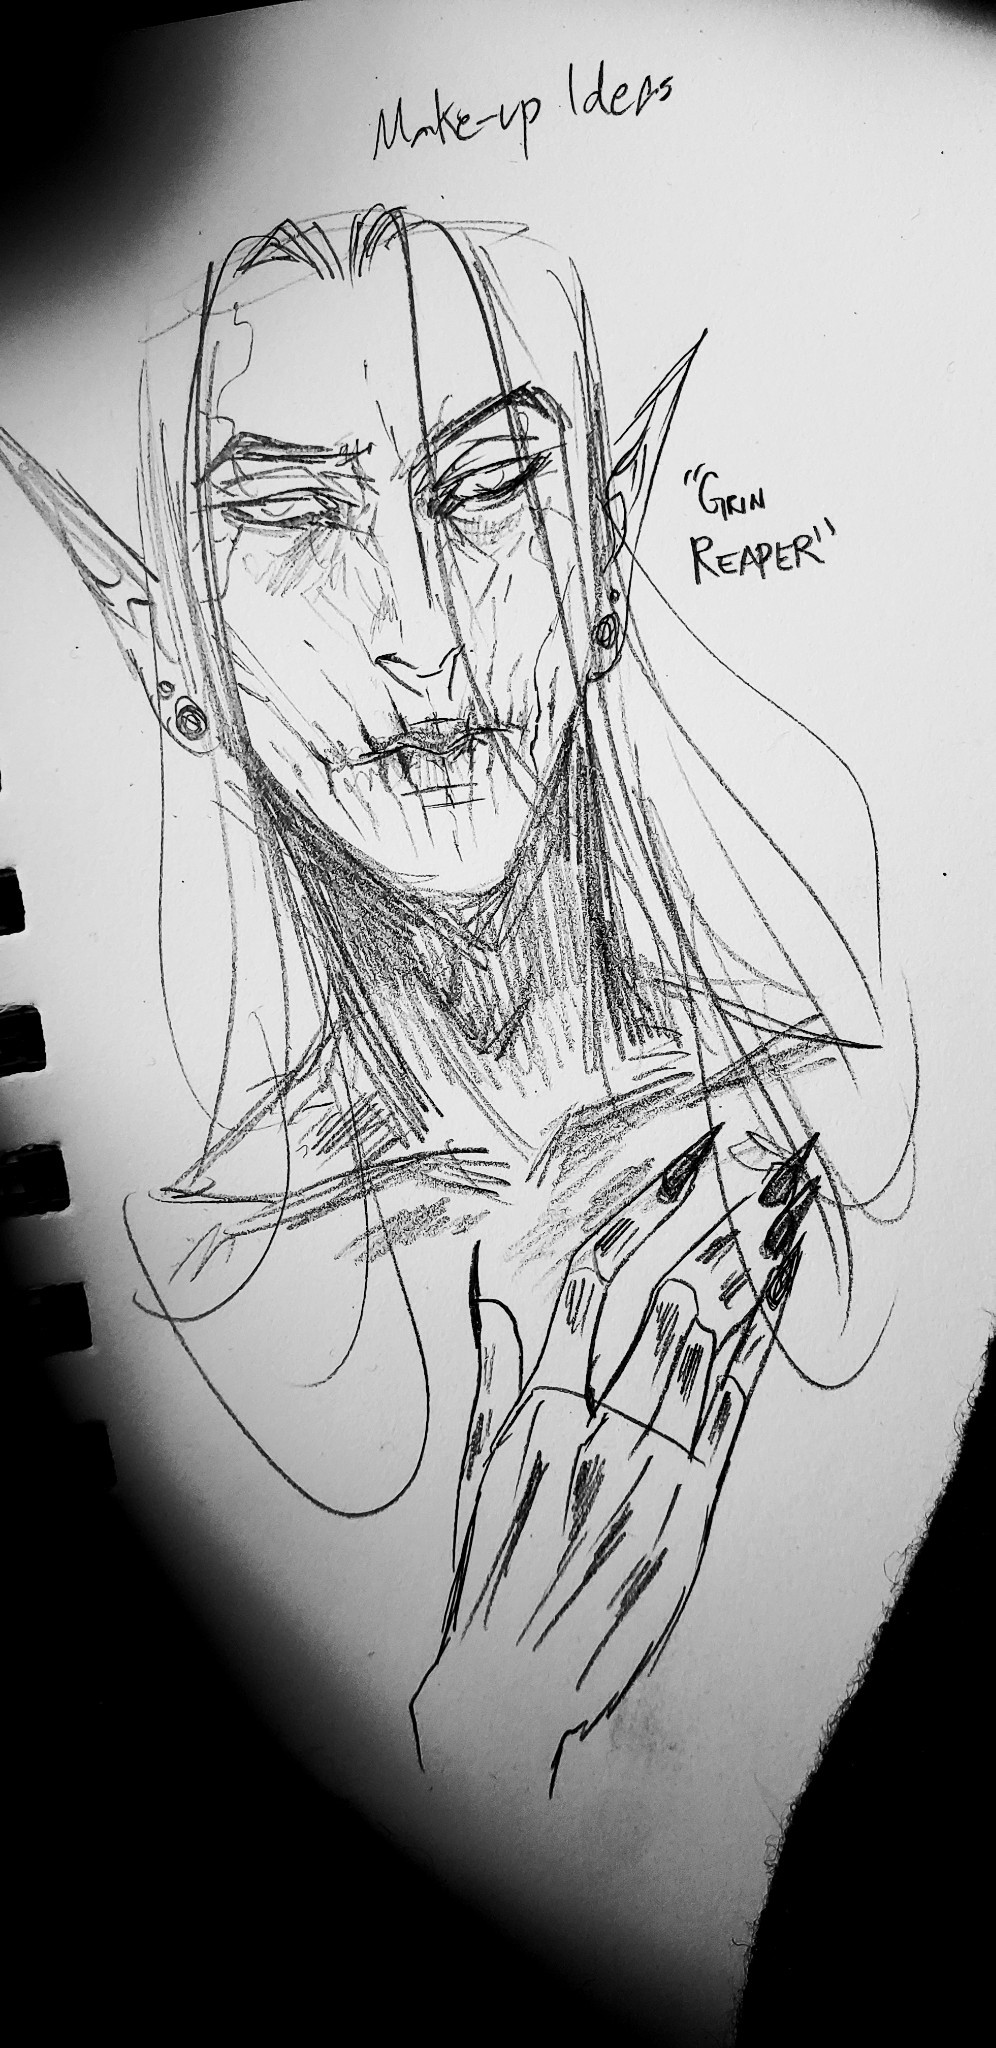 Sketched a makeup look idea for later.💀